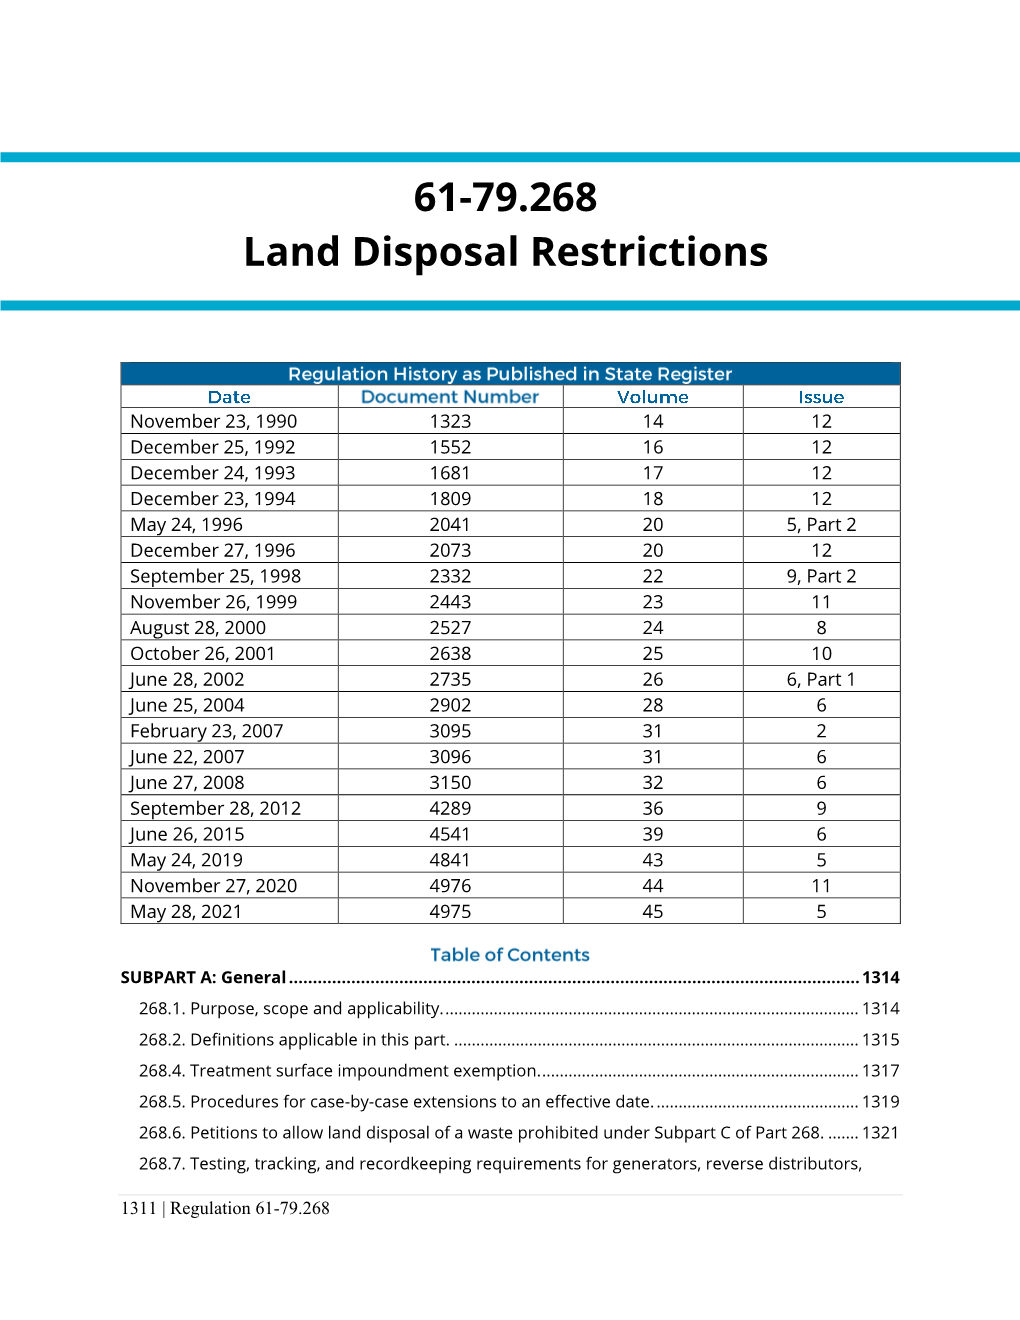 61-79.268 Land Disposal Restrictions